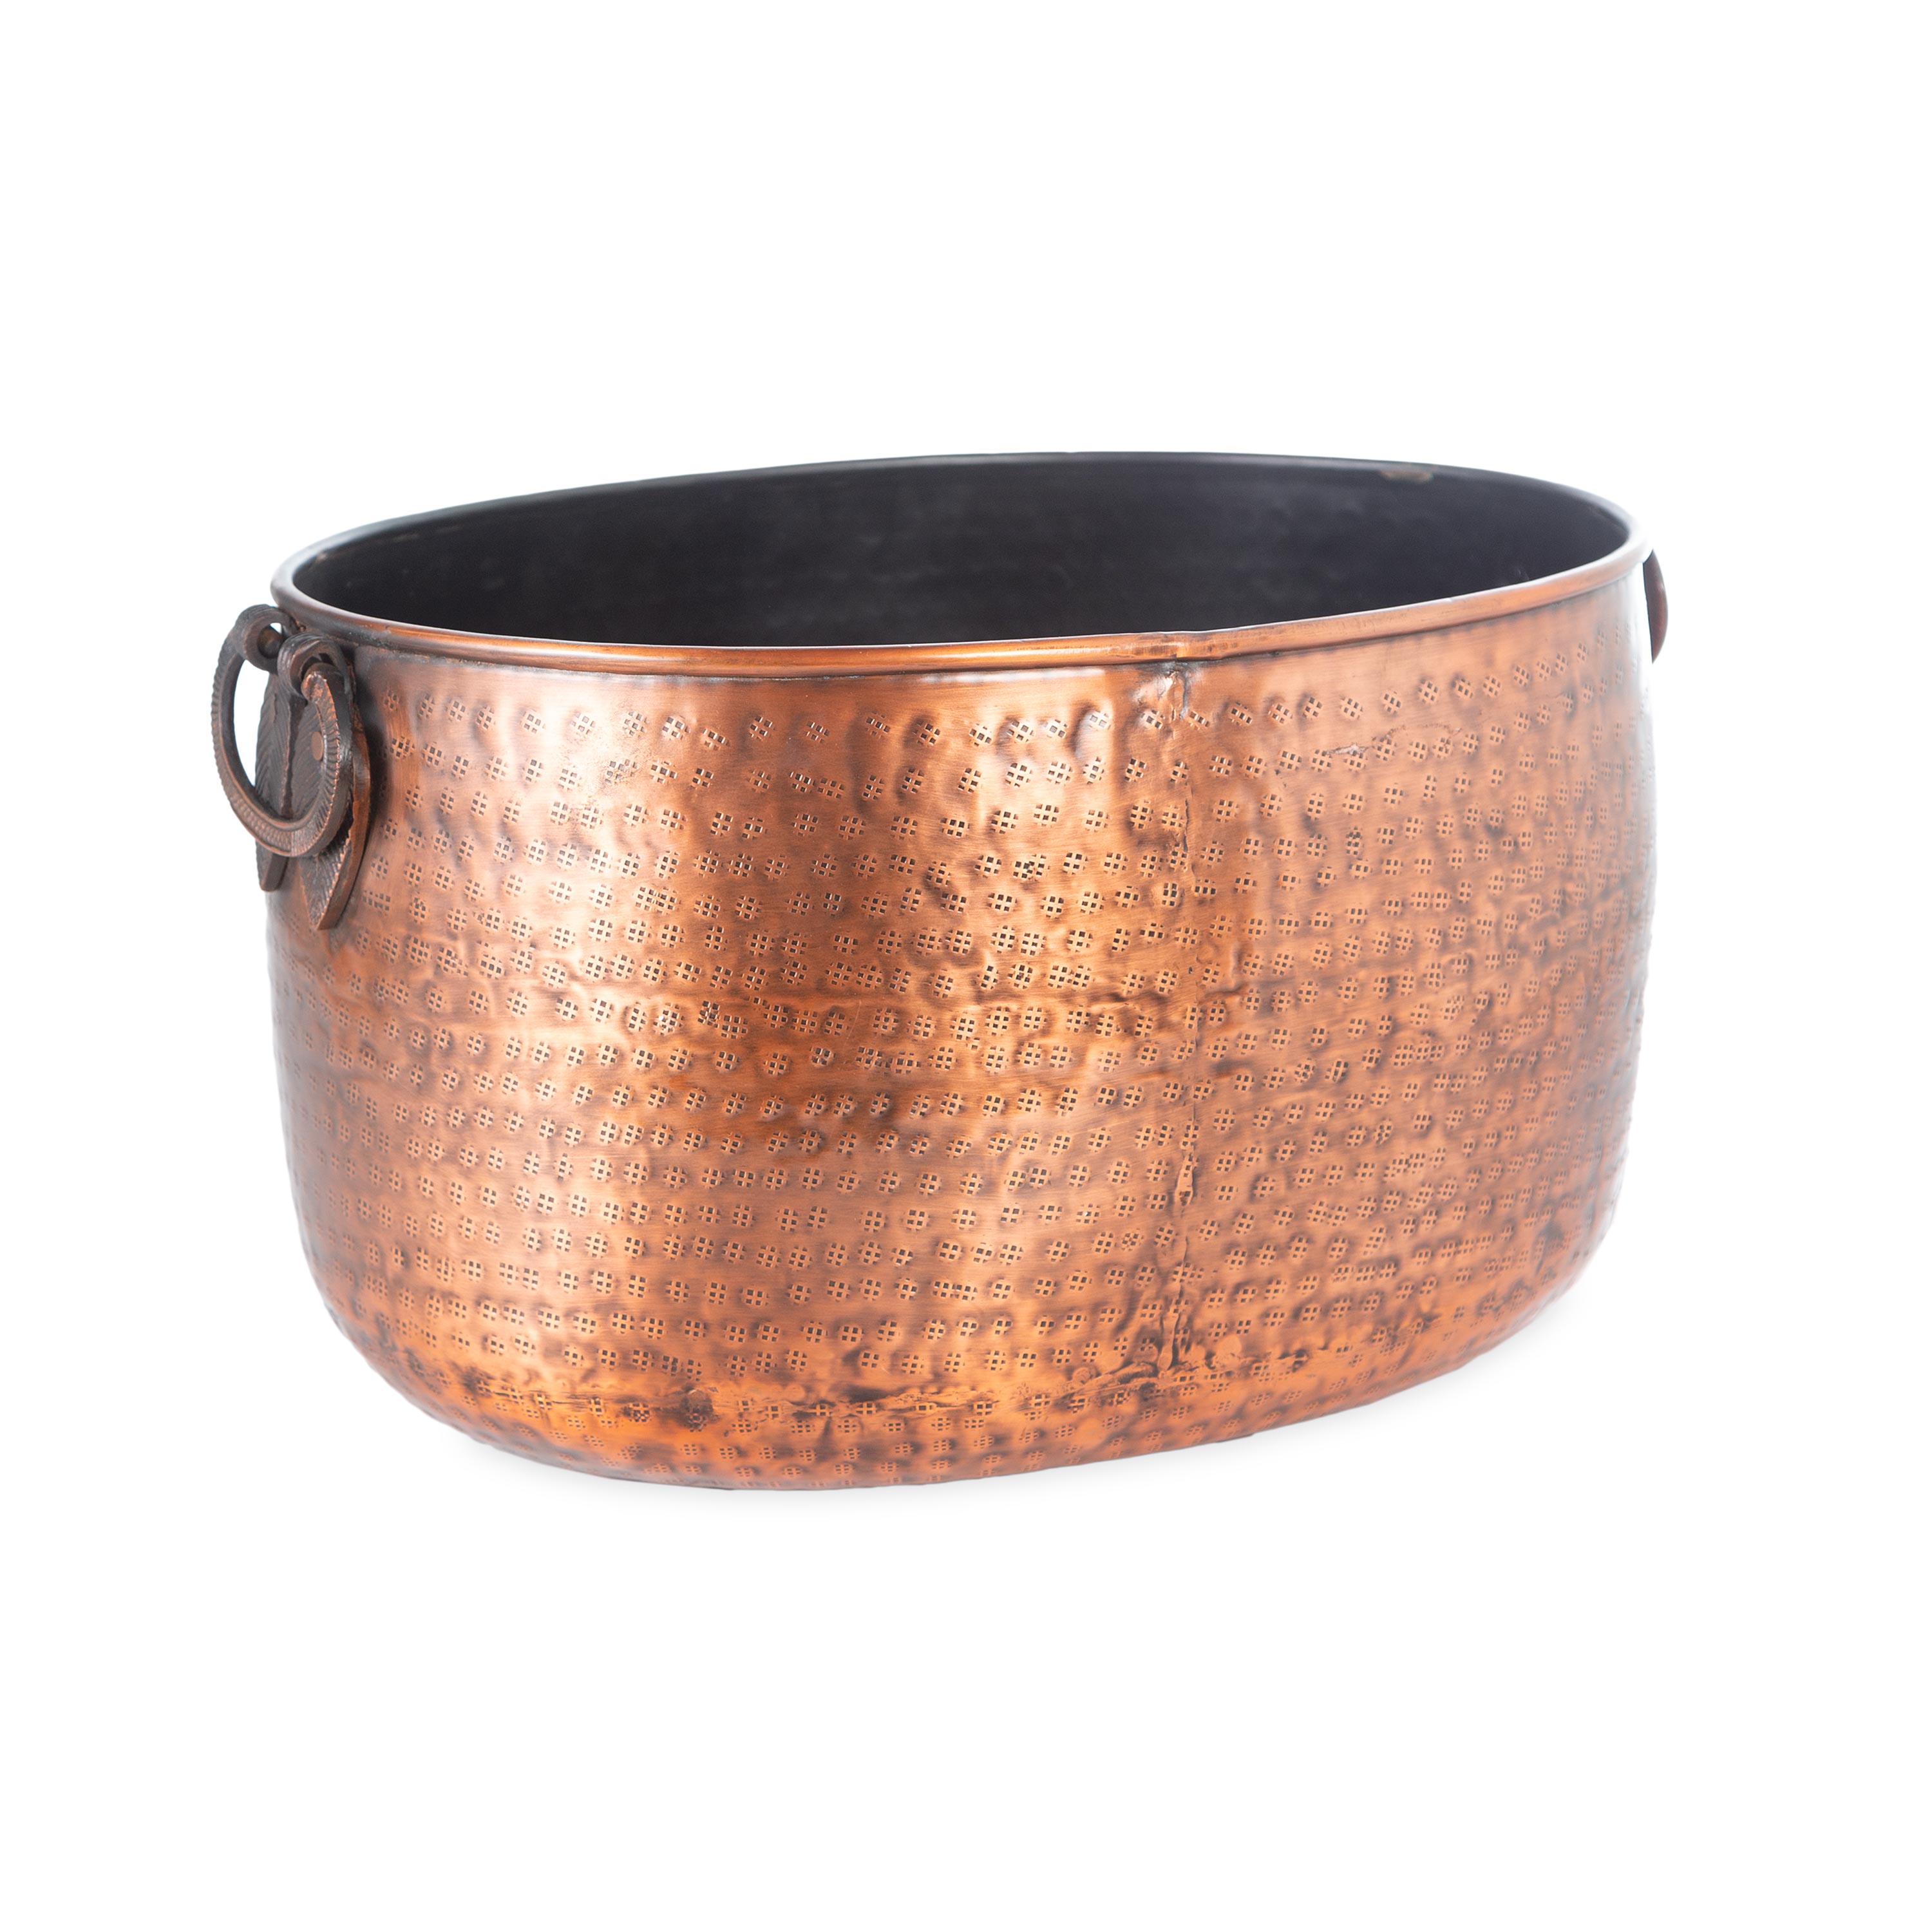 Deluxe Galvanized Ash Bucket with Handle, Lid and Double-Layer Bottom -  Copper